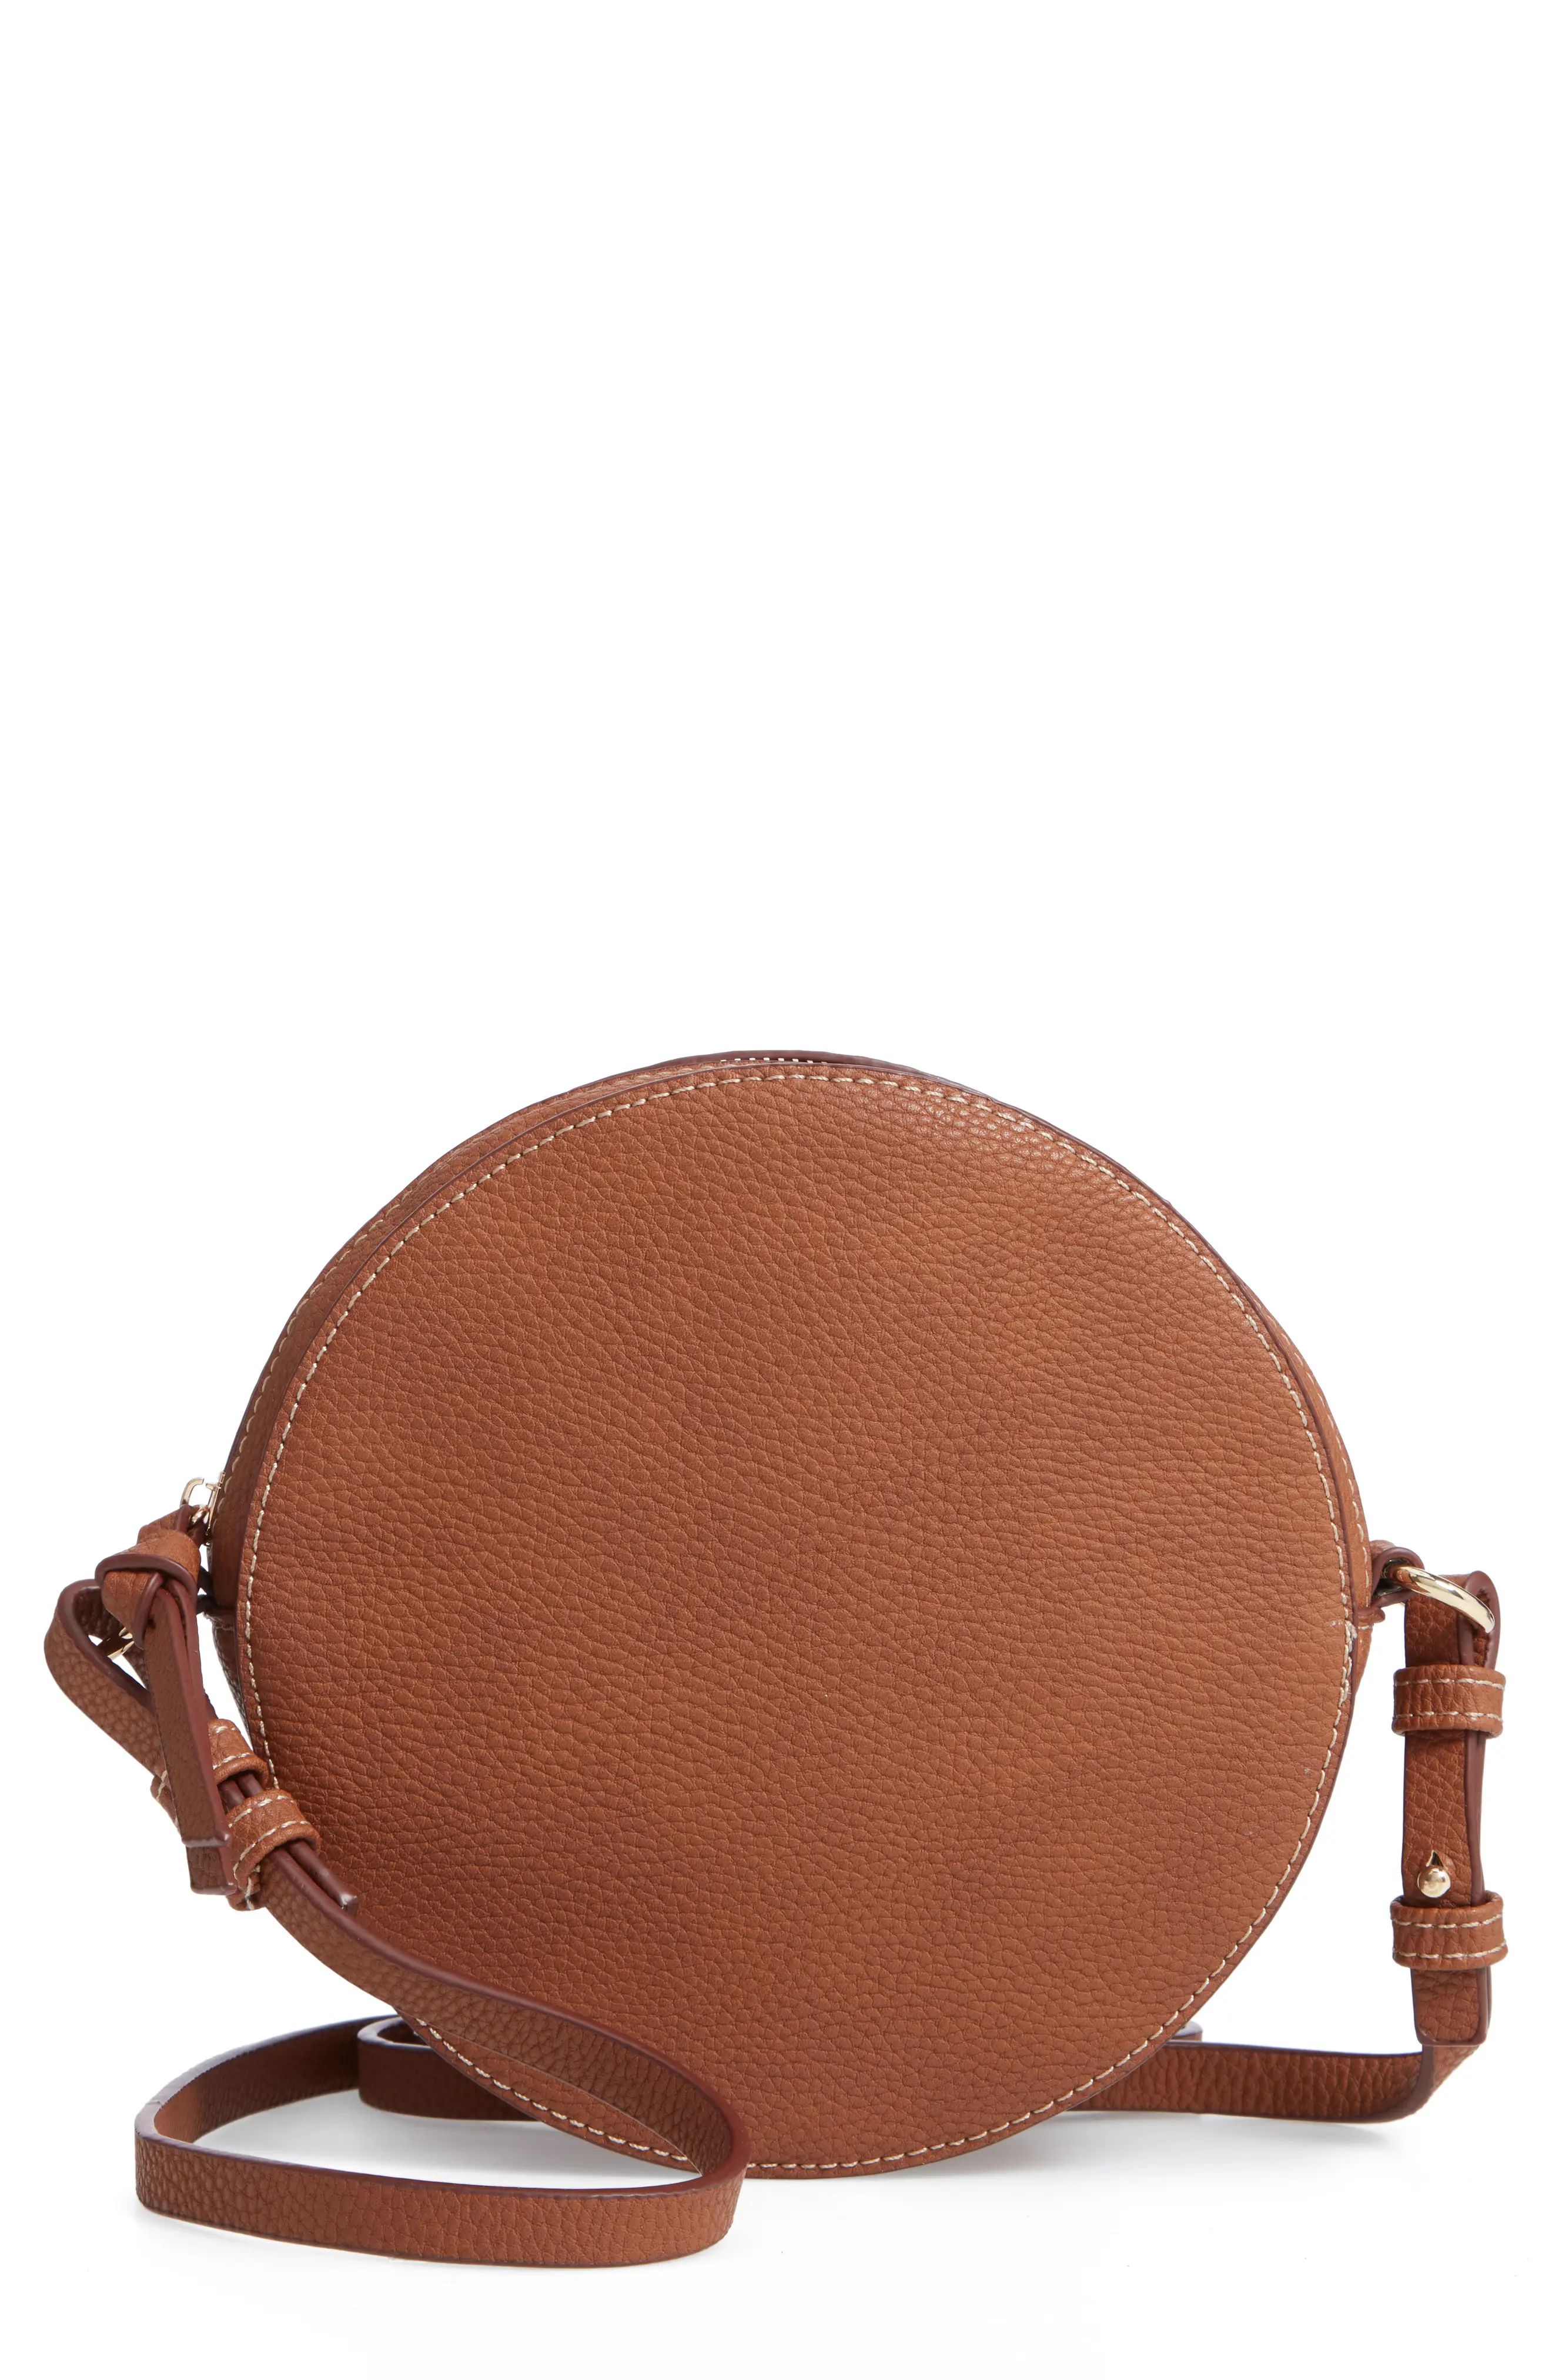 Chelsea28 Cassie Faux Leather Circle Crossbody Bag | Nordstrom